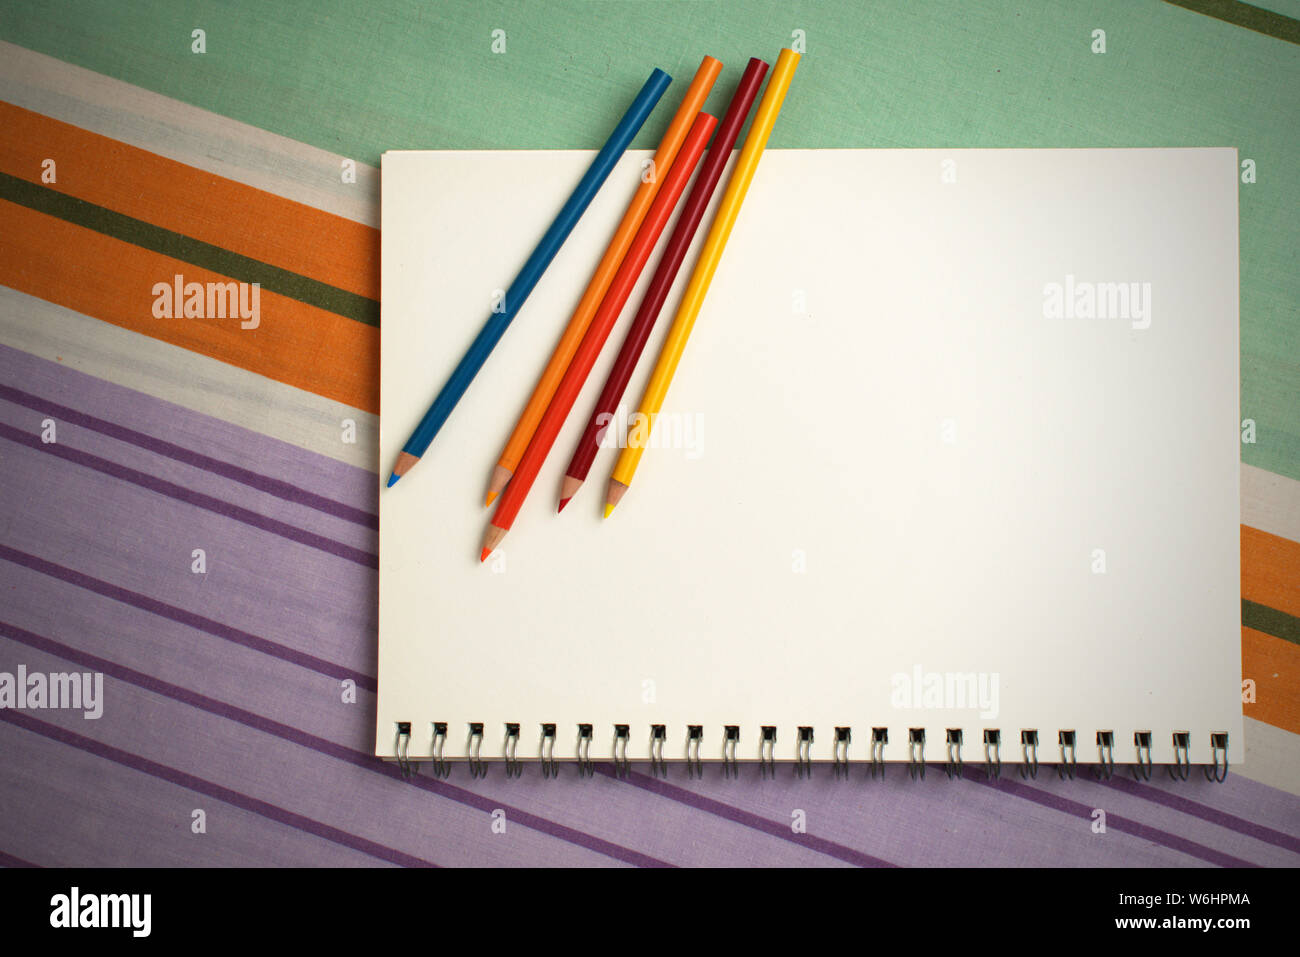 Spiral sketch pad and graphite pencils template image. Good copy